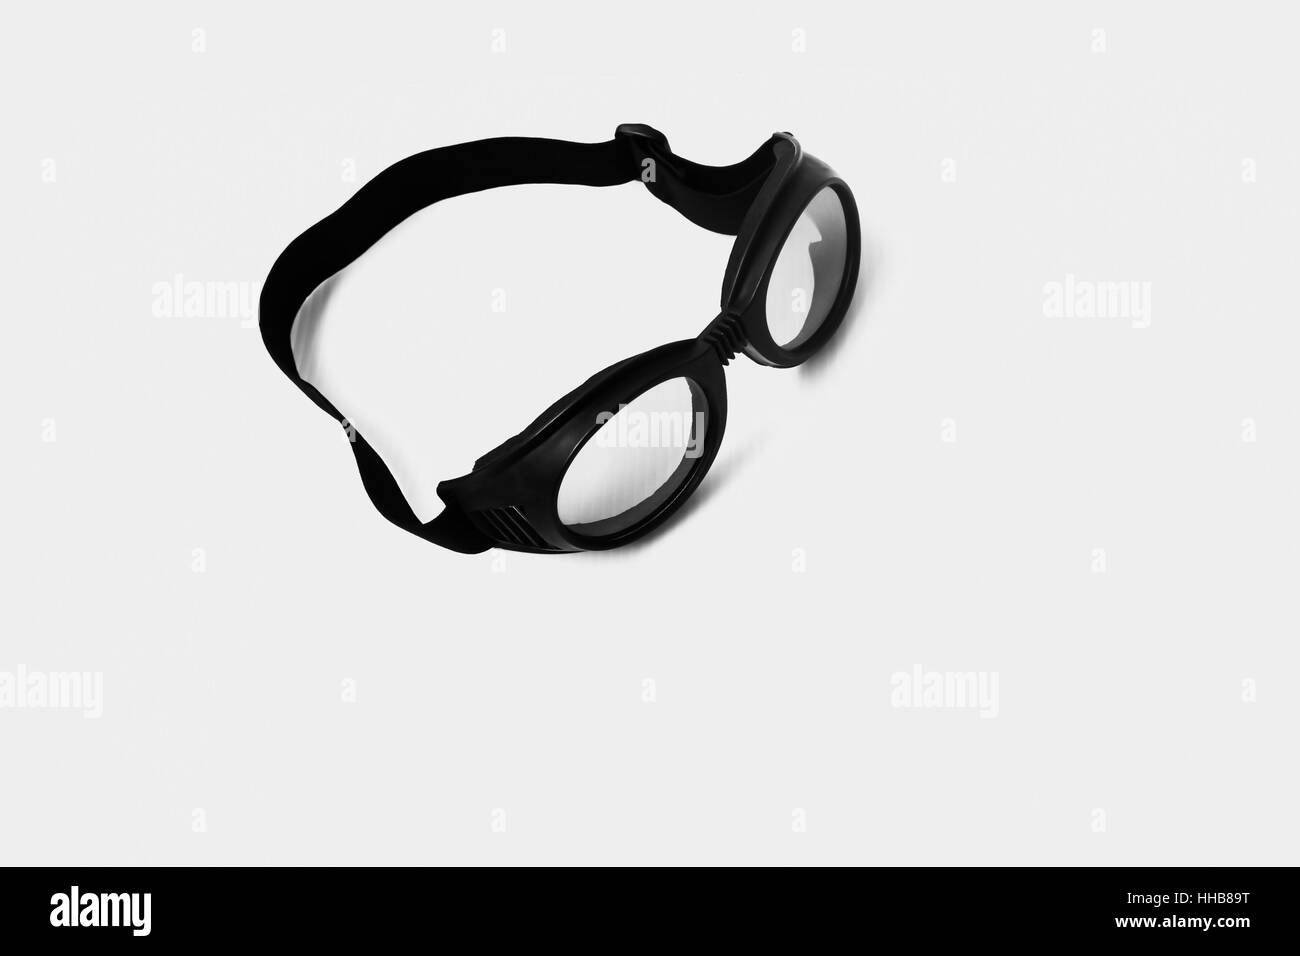 goggles head is black on a white background. Stock Photo